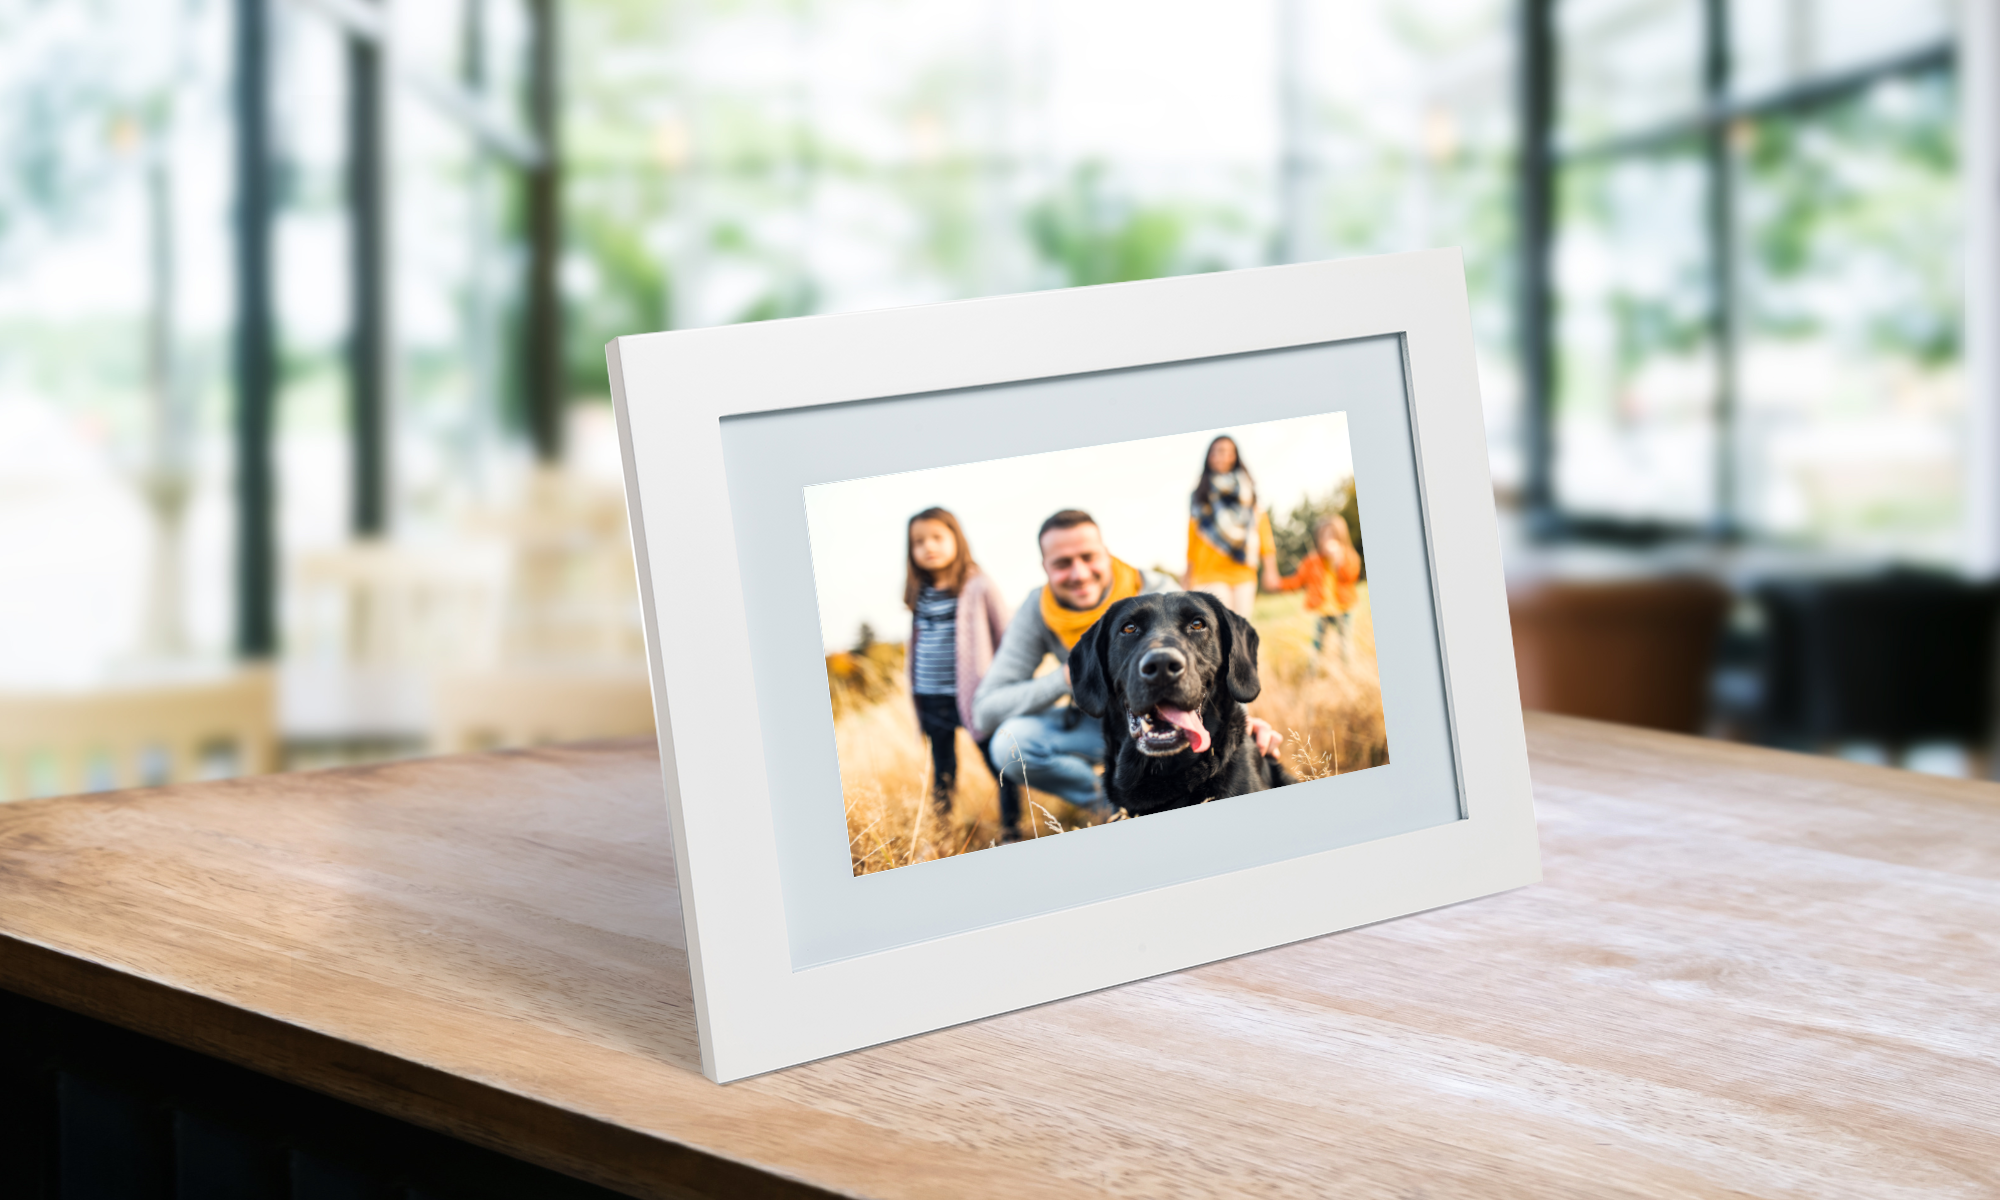 A digital frame with a white frame with a picture of a family and a dog